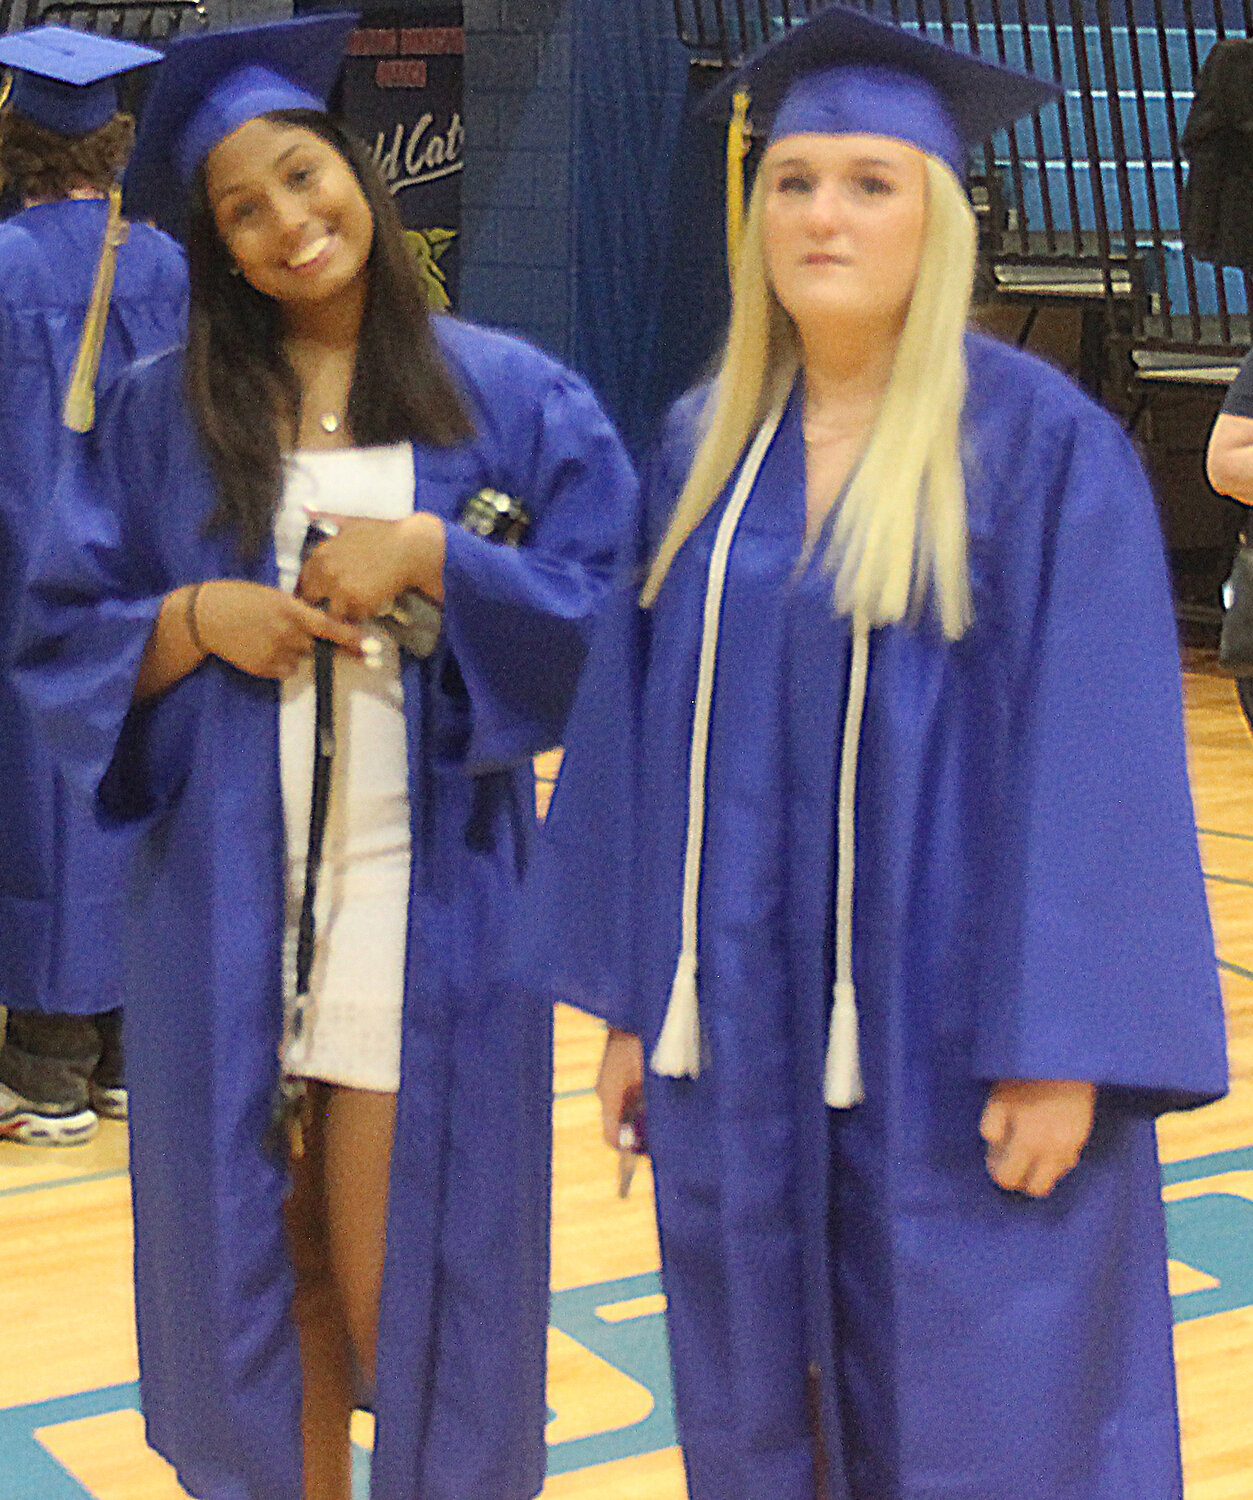 Two Wright City High School seniors enjoy a moment in the gym before the class picture was taken.